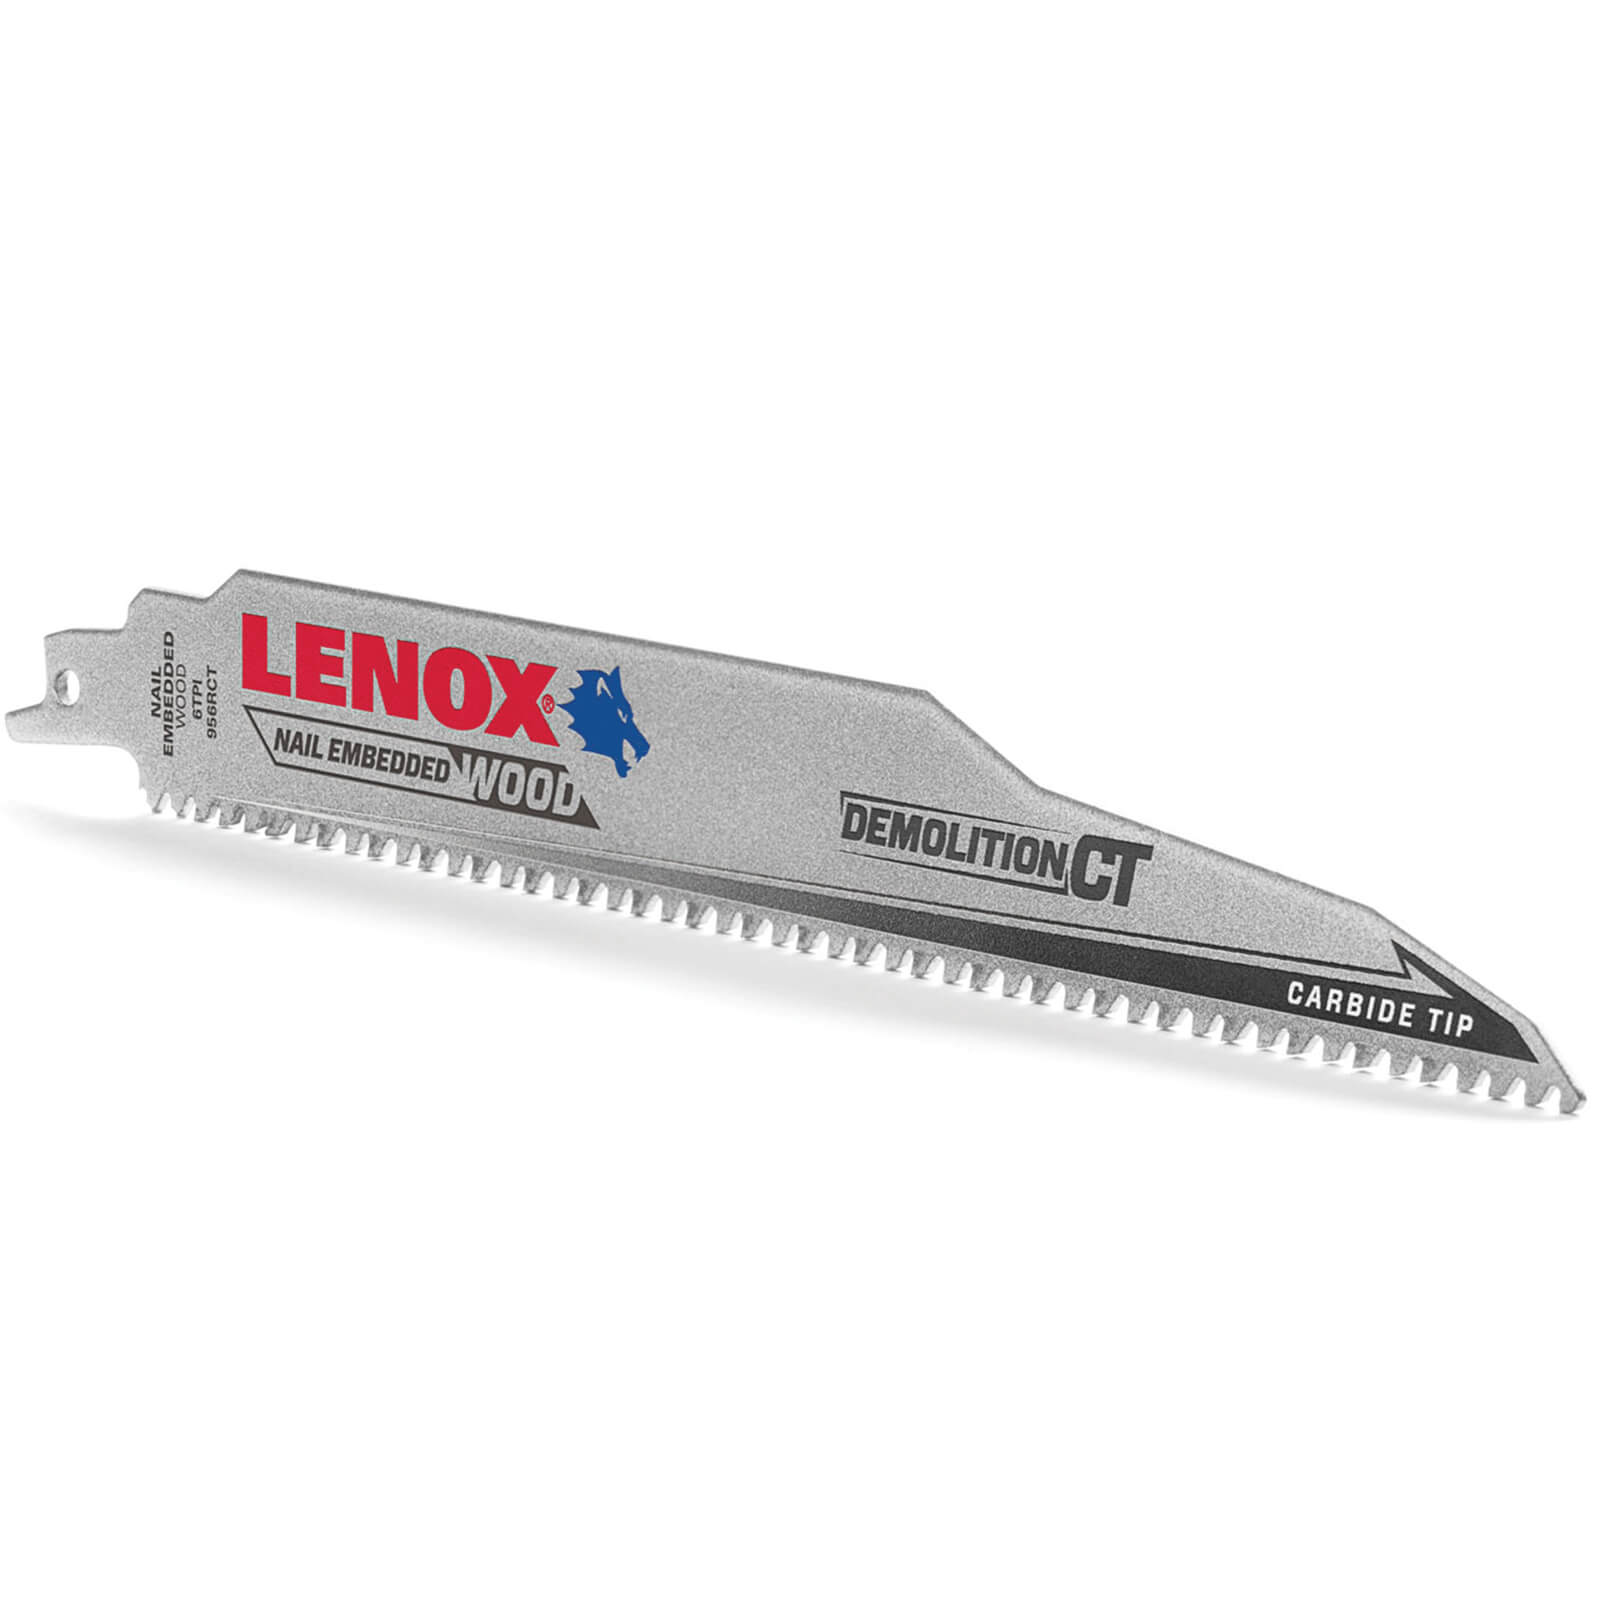 Image of Lenox CT Carbide Tipped Demolition Reciprocating Sabre Saw Blades 152mm Pack of 1